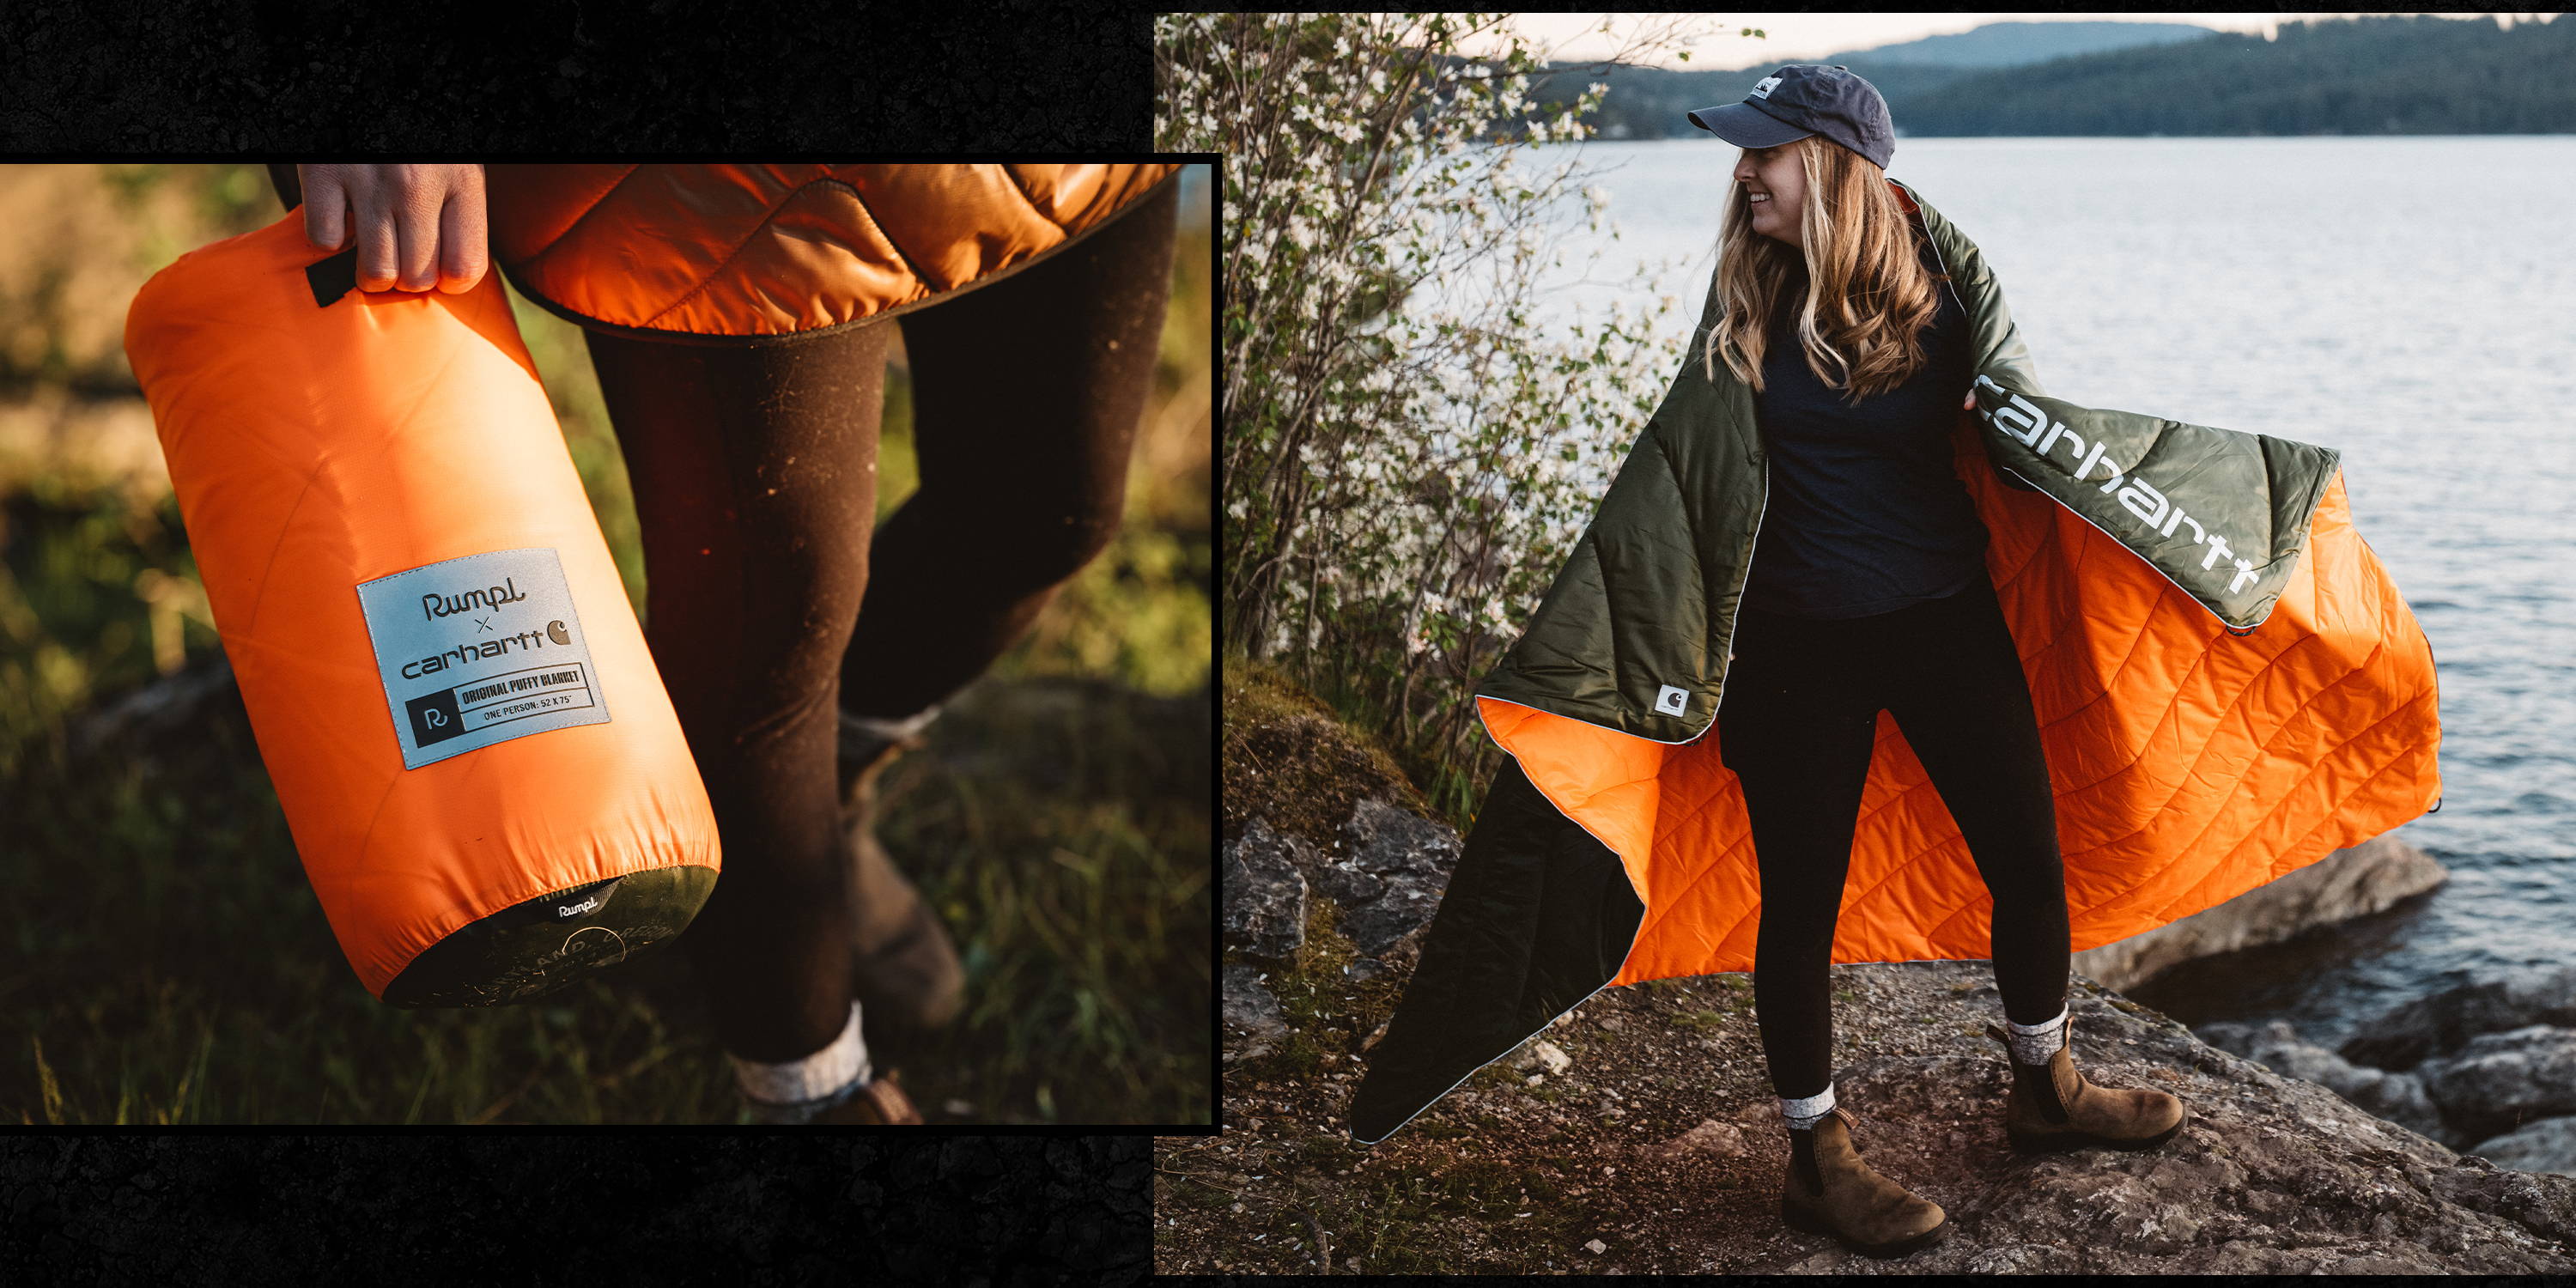 Woman wrapped in a Rumpl Carhartt blanket by the river